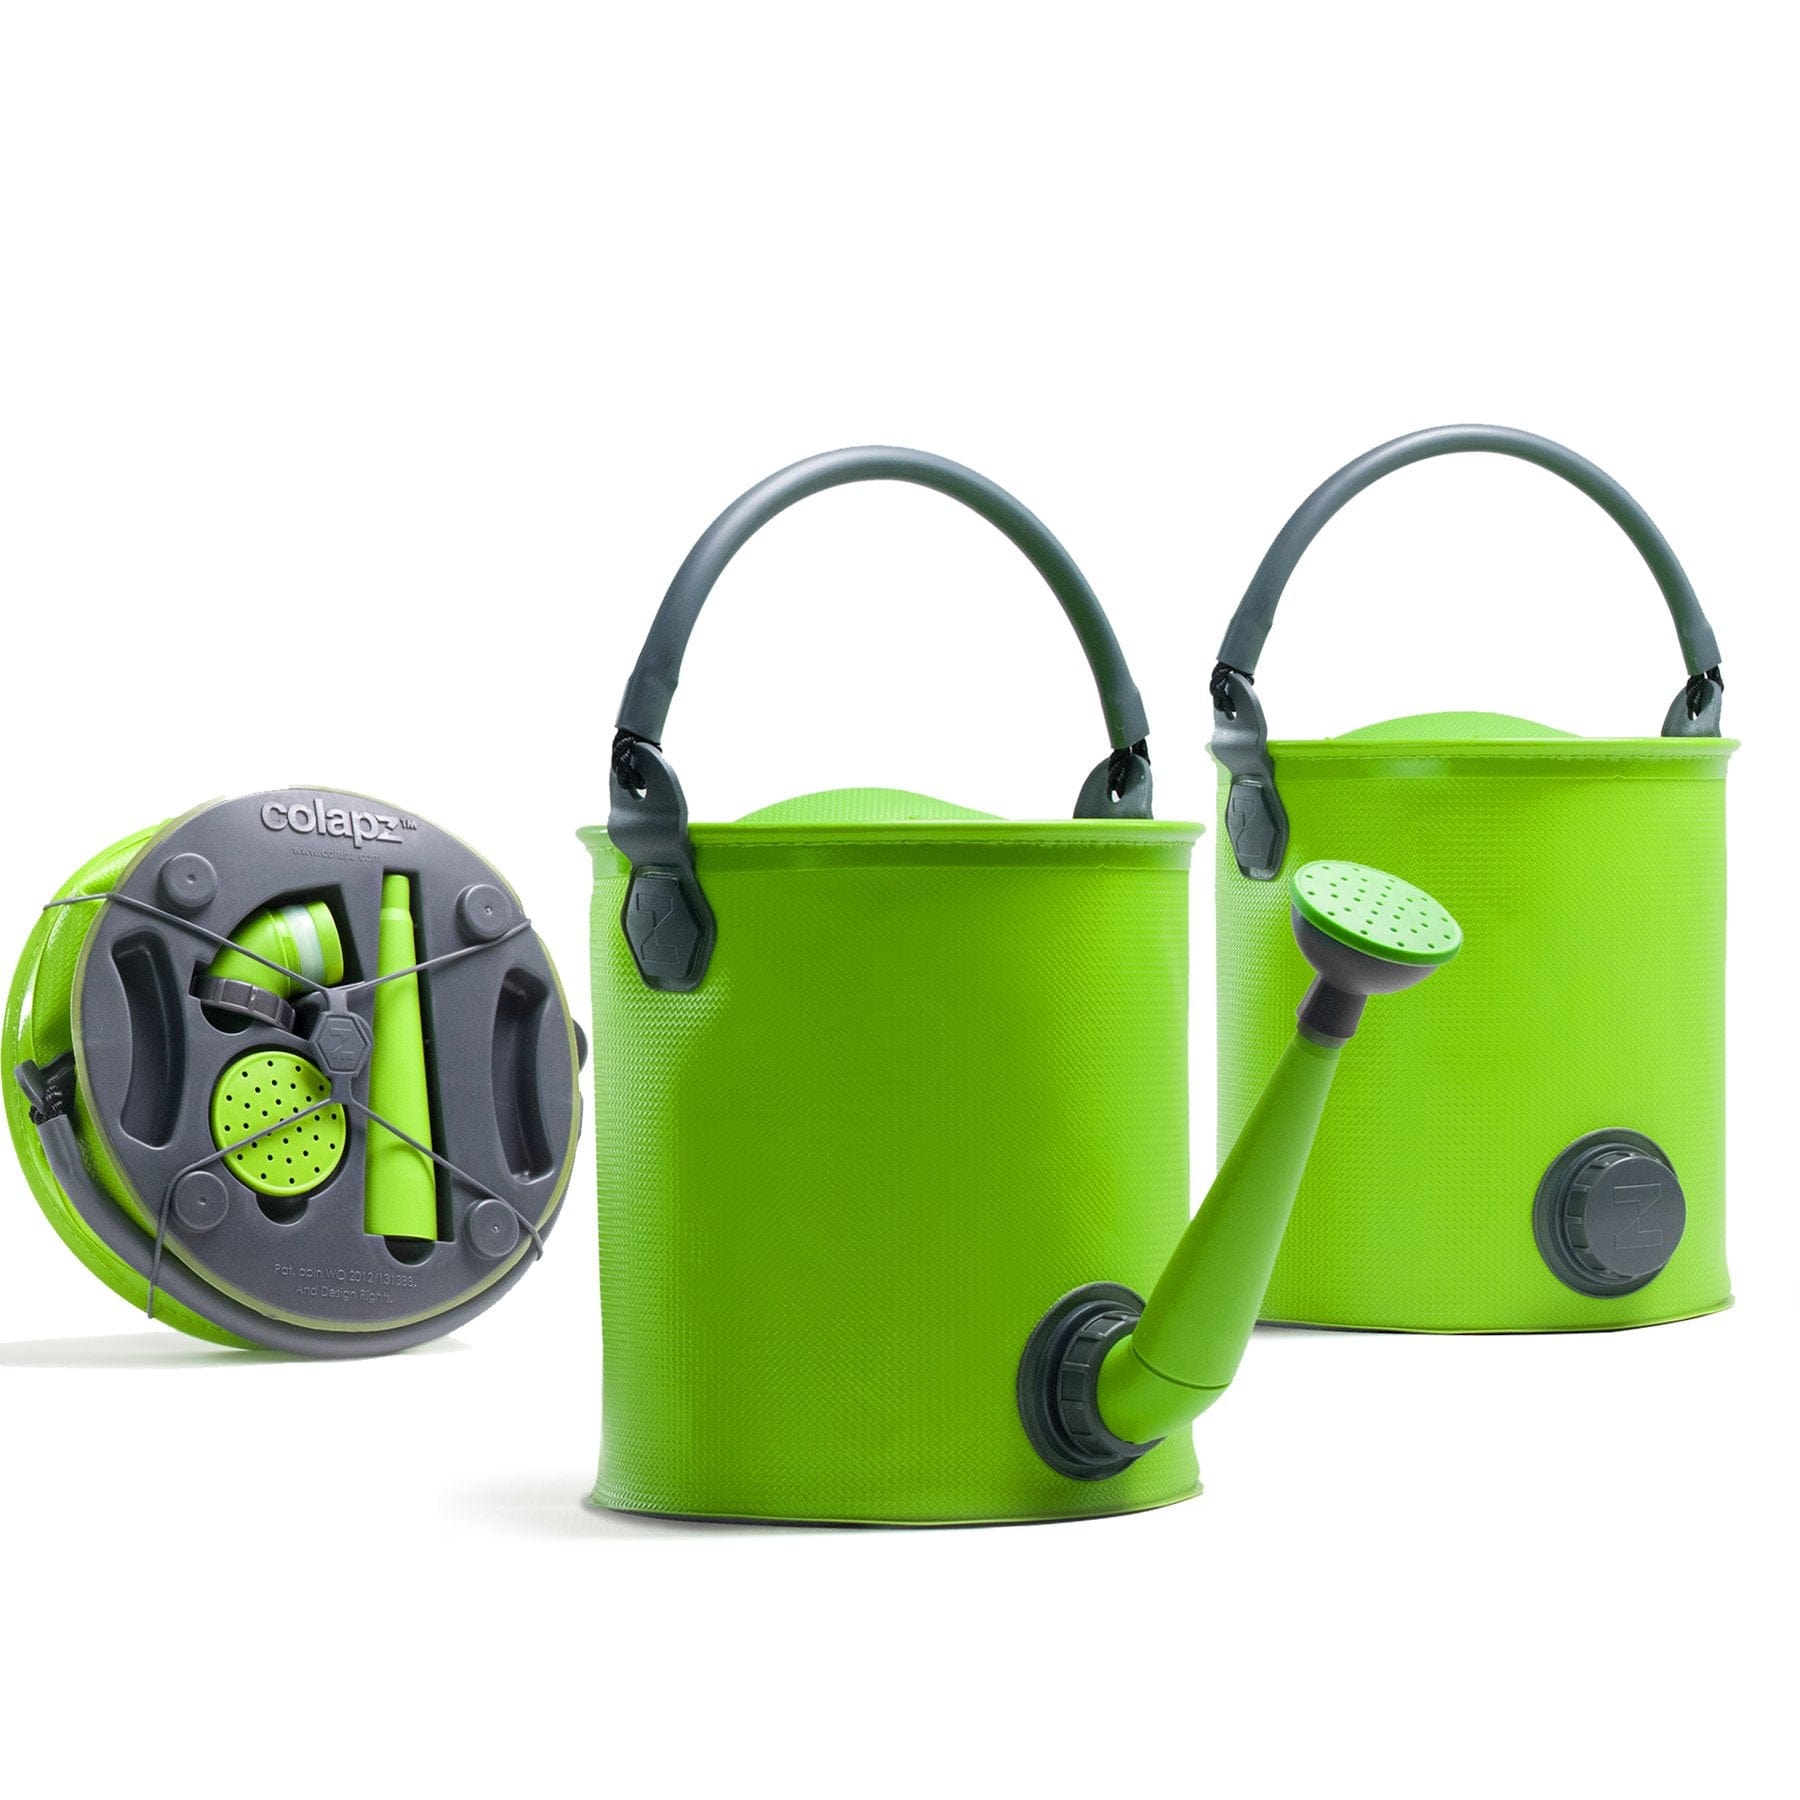 Hoses & Brushes Water GREEN Collapsible Watering Can - Collapsible Bucket - Folding Bucket - Campervan Accessories UK